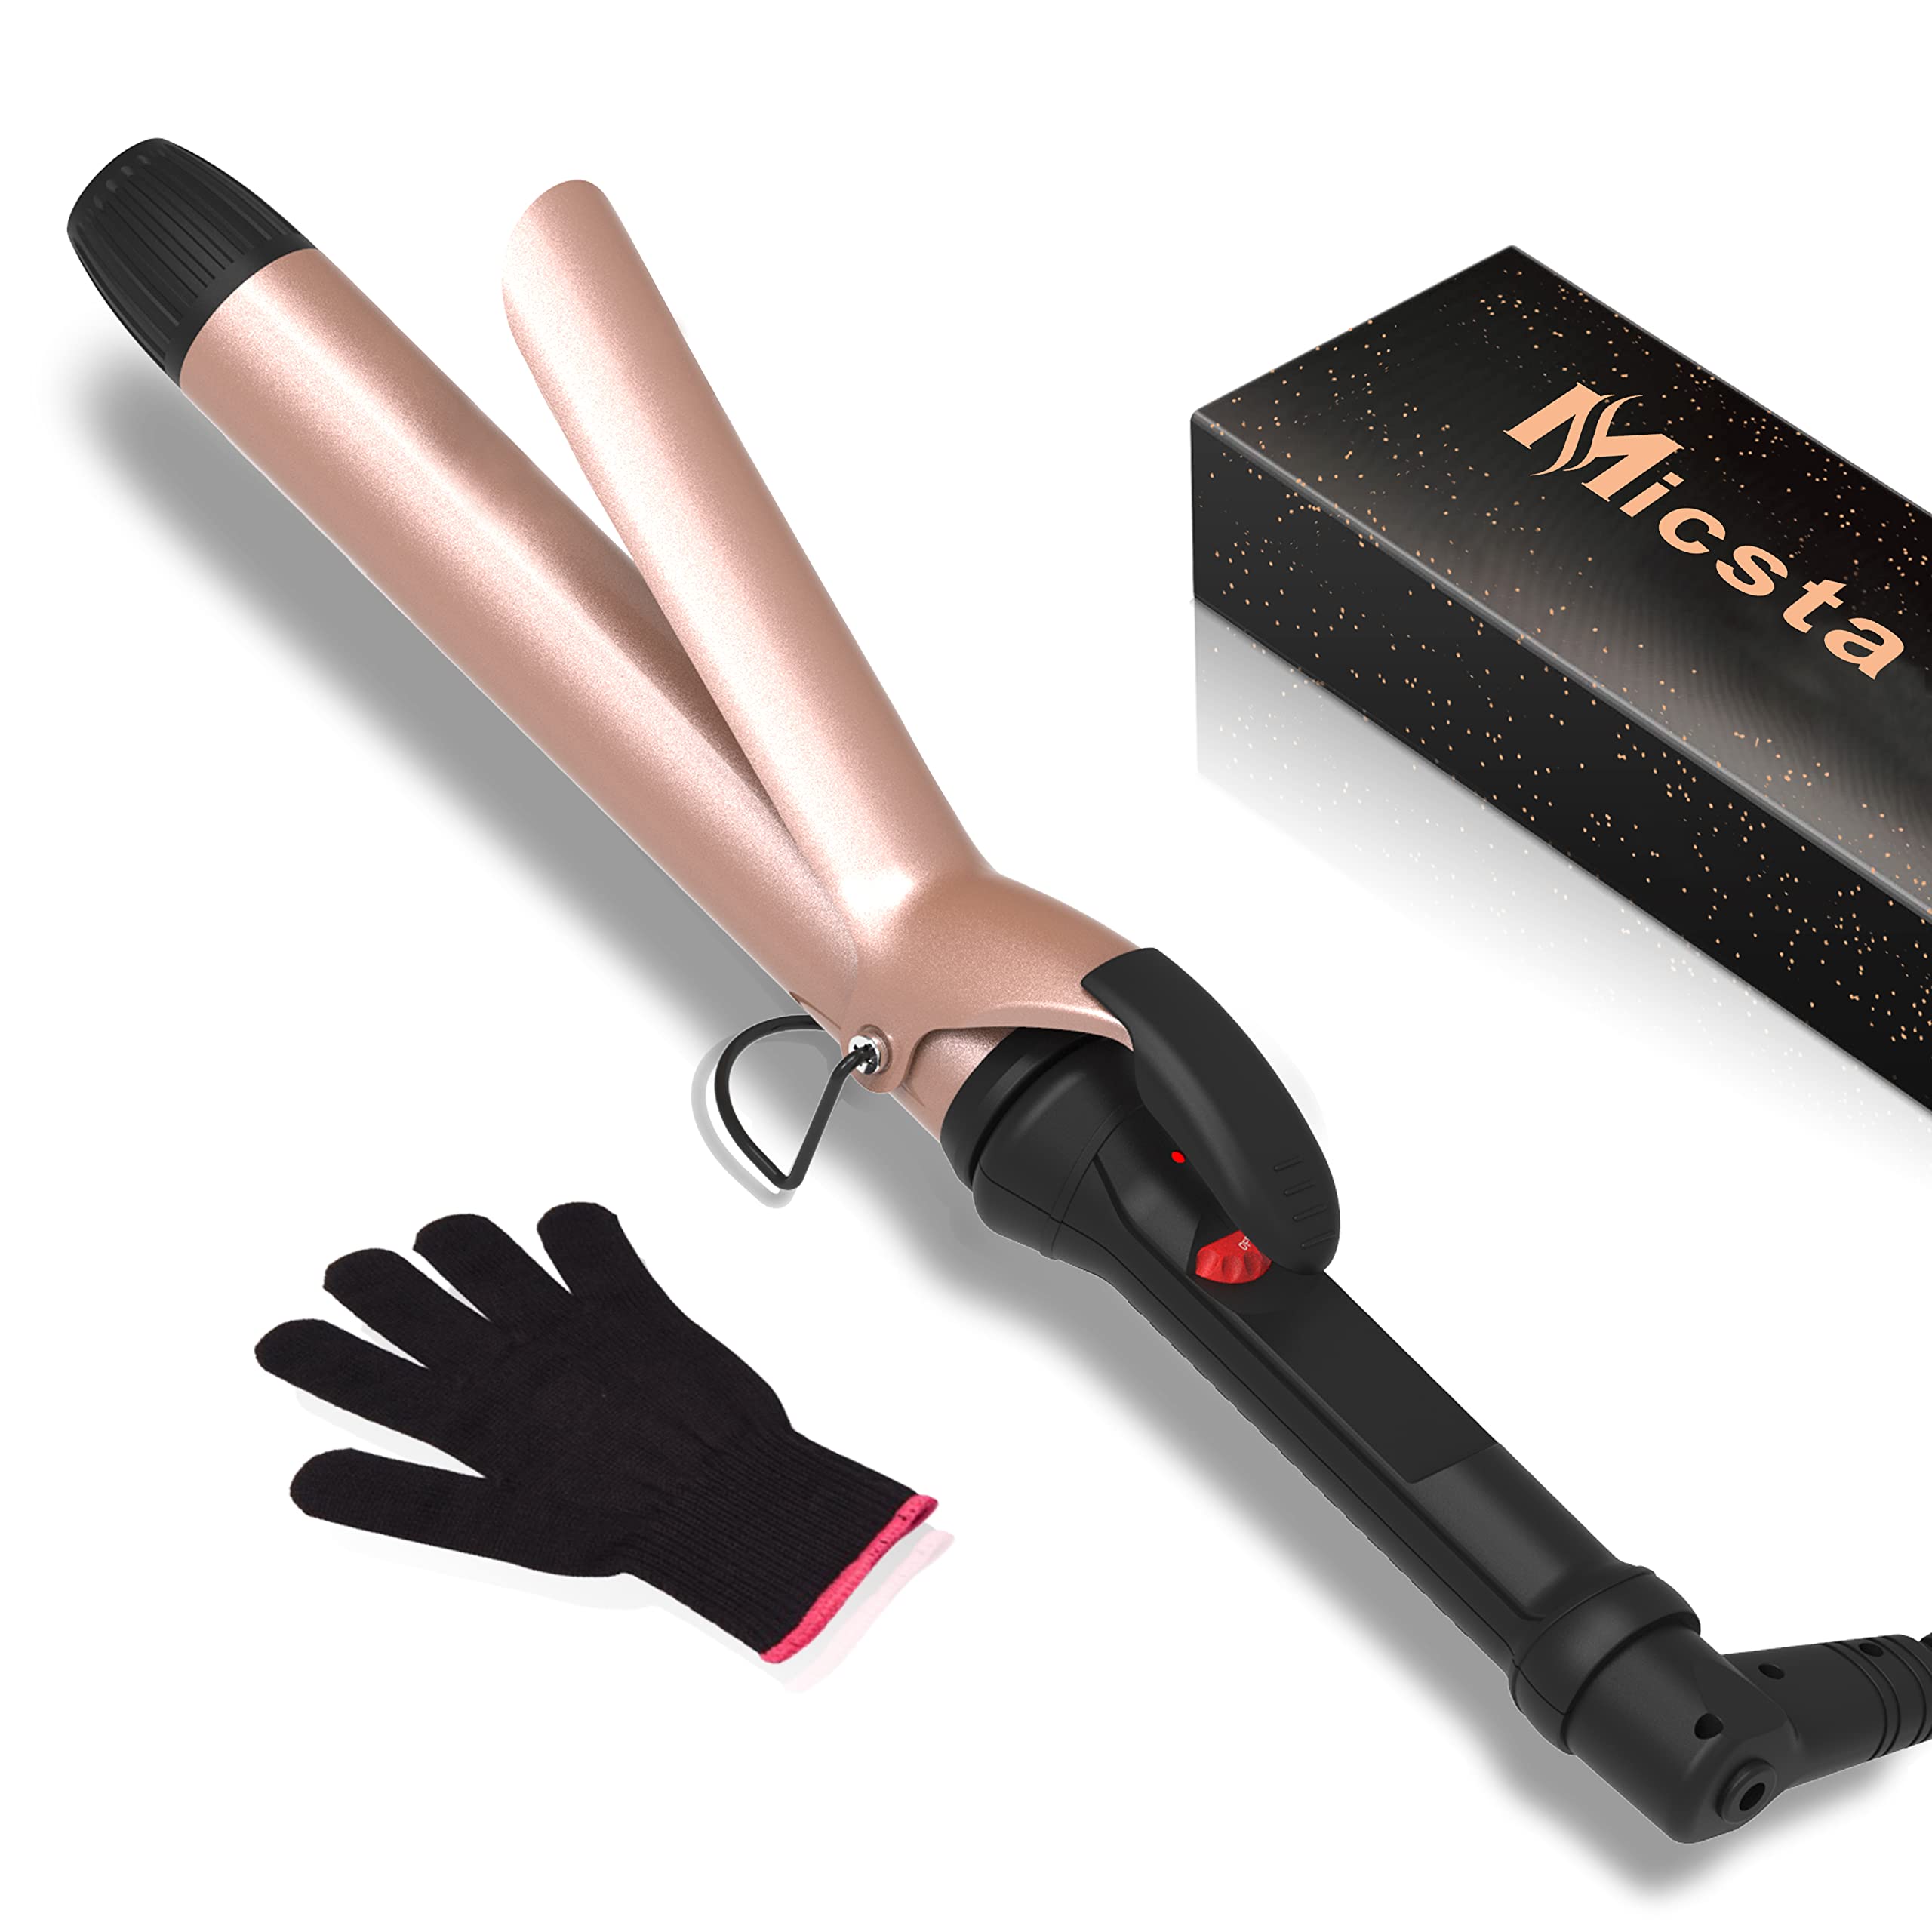 MICSTA 1 1/4 inch Curling Iron, 32mm Large Curling Wand Extra Long berral,  ” Thick